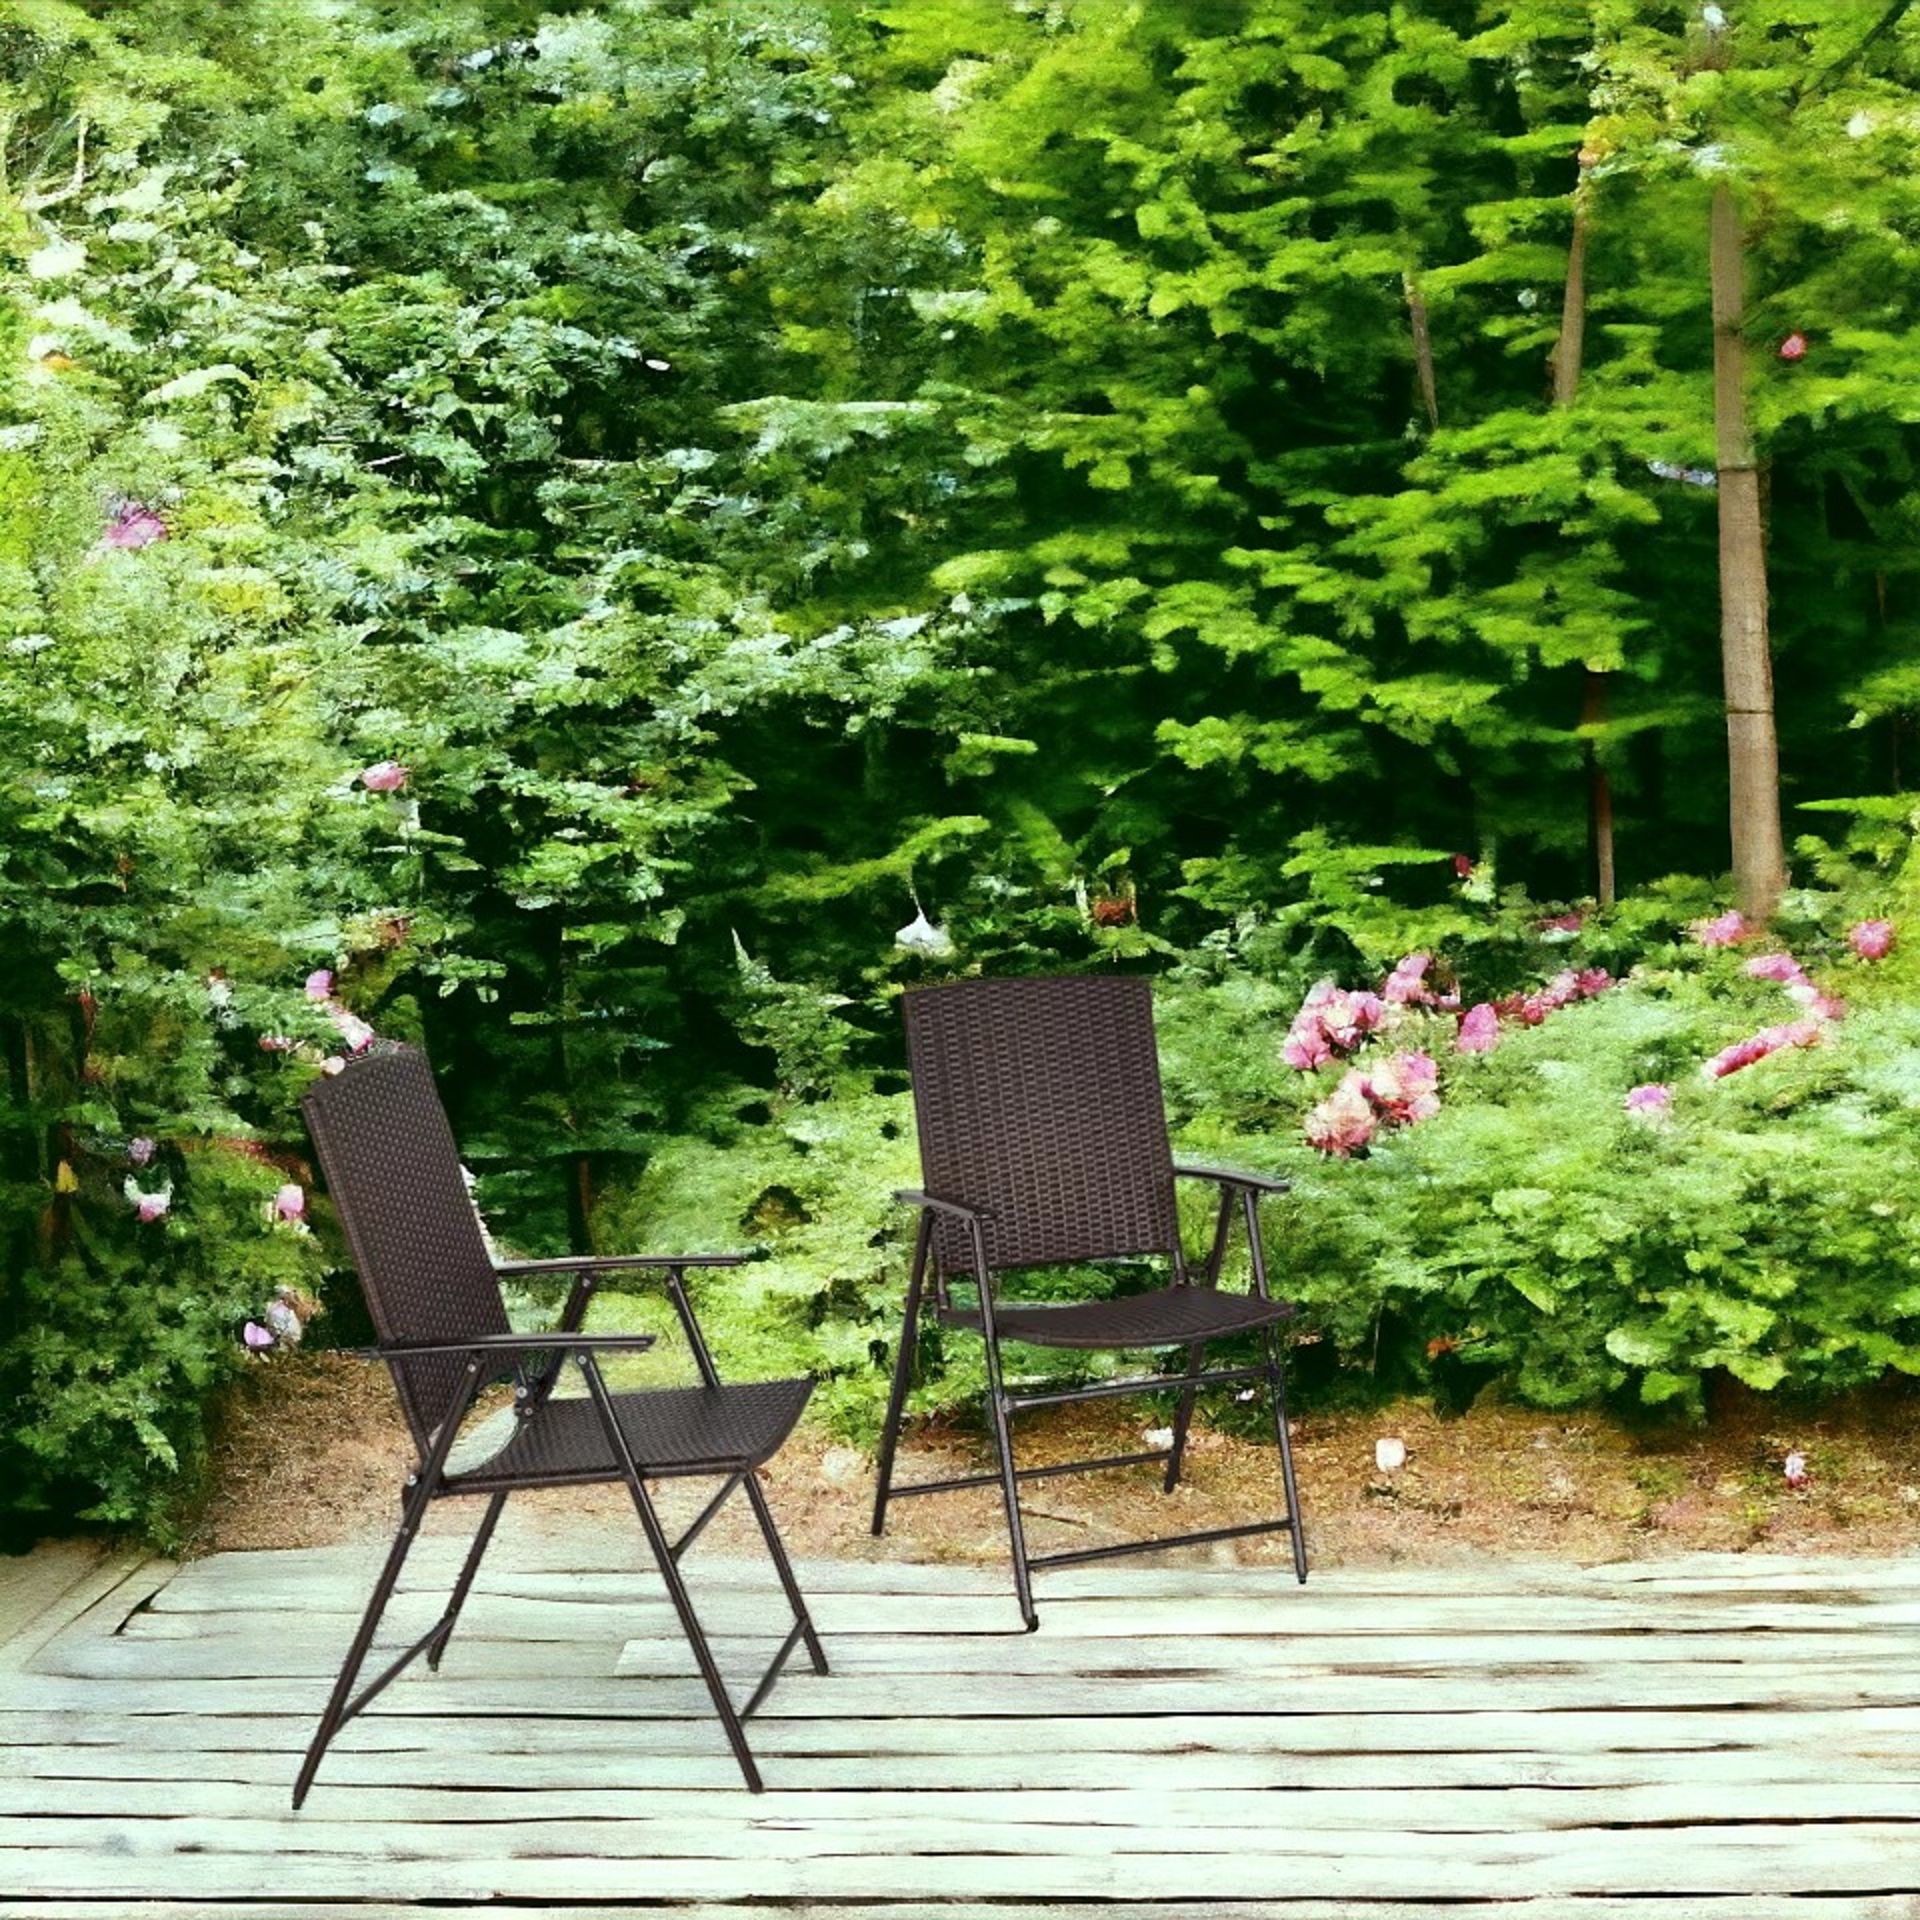 FREE DELIVERY - BRAND NEW PCS RATTAN CHAIR FOLDABLE GARDEN FURNITURE W/ ARMREST STEEL FRAME - Image 2 of 2